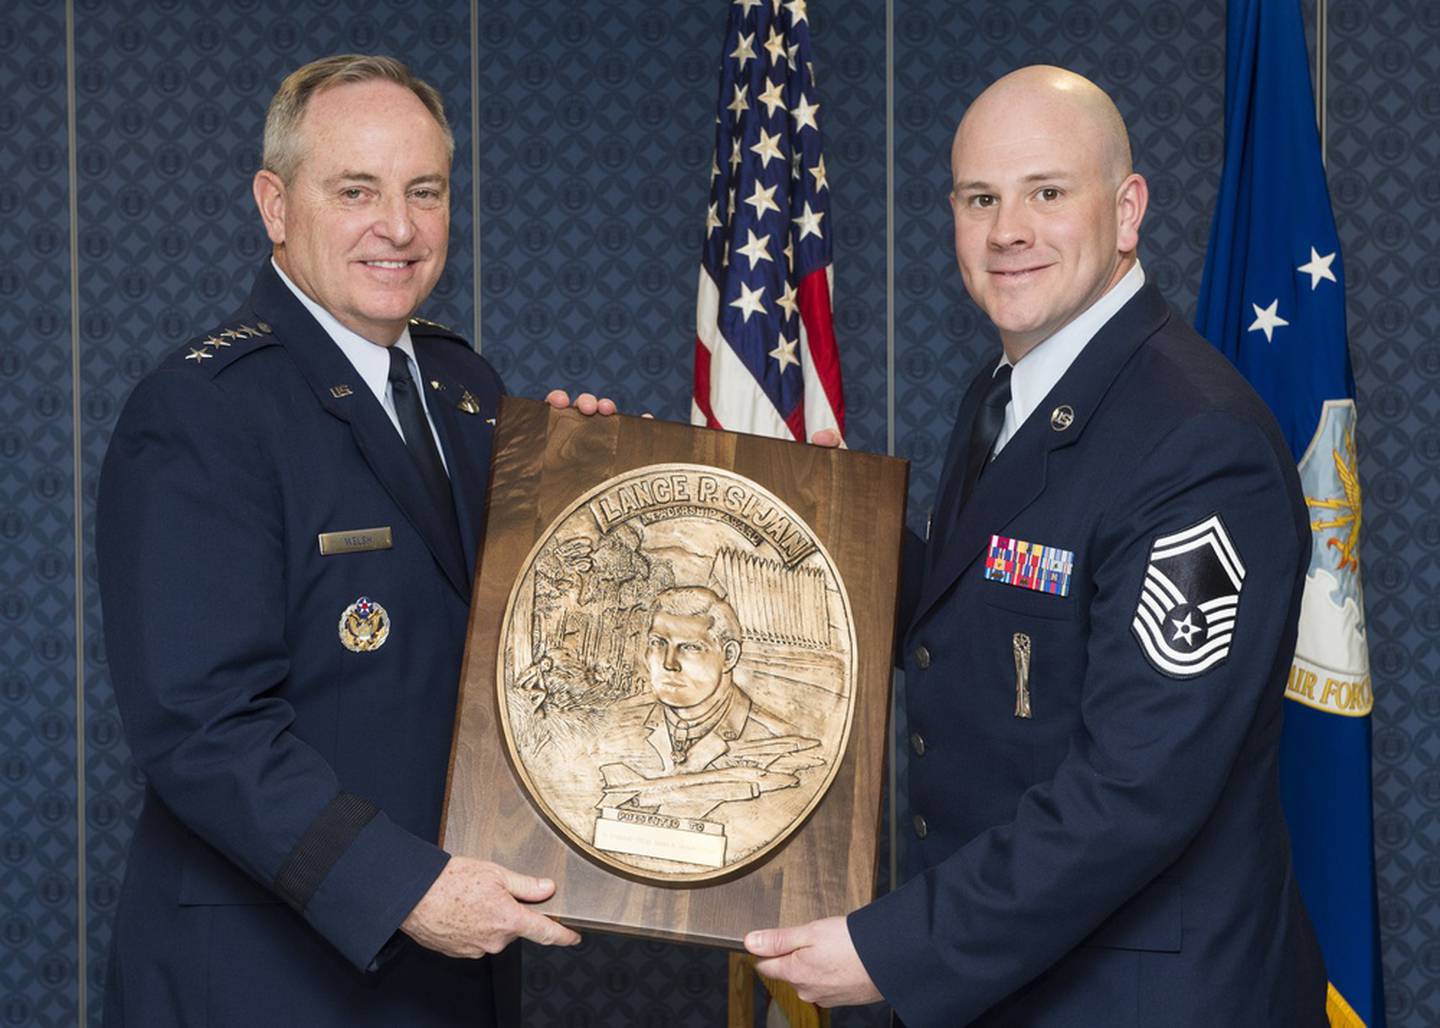 Gen. Mark. A Welsh III, the Air Force chief of staff at the time, presents the Lance P. Sijan Leadership award to then-Senior Master Sgt. Justin Deisch during a ceremony in the Pentagon, Washington. D.C., April 7, 2016. Deisch was a material flight chief assigned to the 705th Munitions Squadron at Minot Air Force Base, N.D., and led 103 personnel across the only munitions squadron supporting the nuclear triad. (Jim Varhegyi/Air Force)